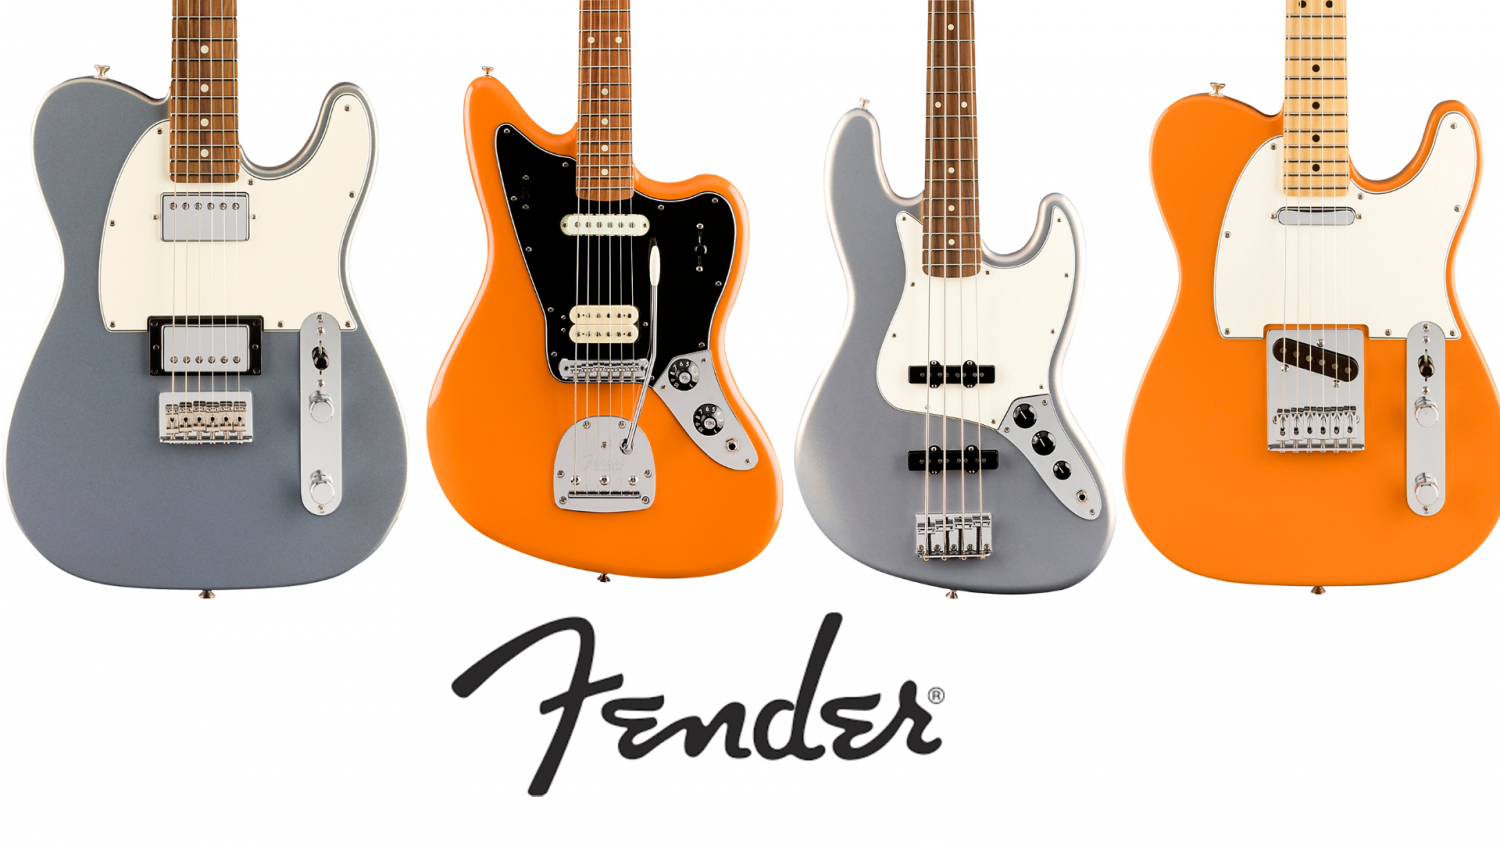 The Fender Player series is now offered in two stunning new finishes